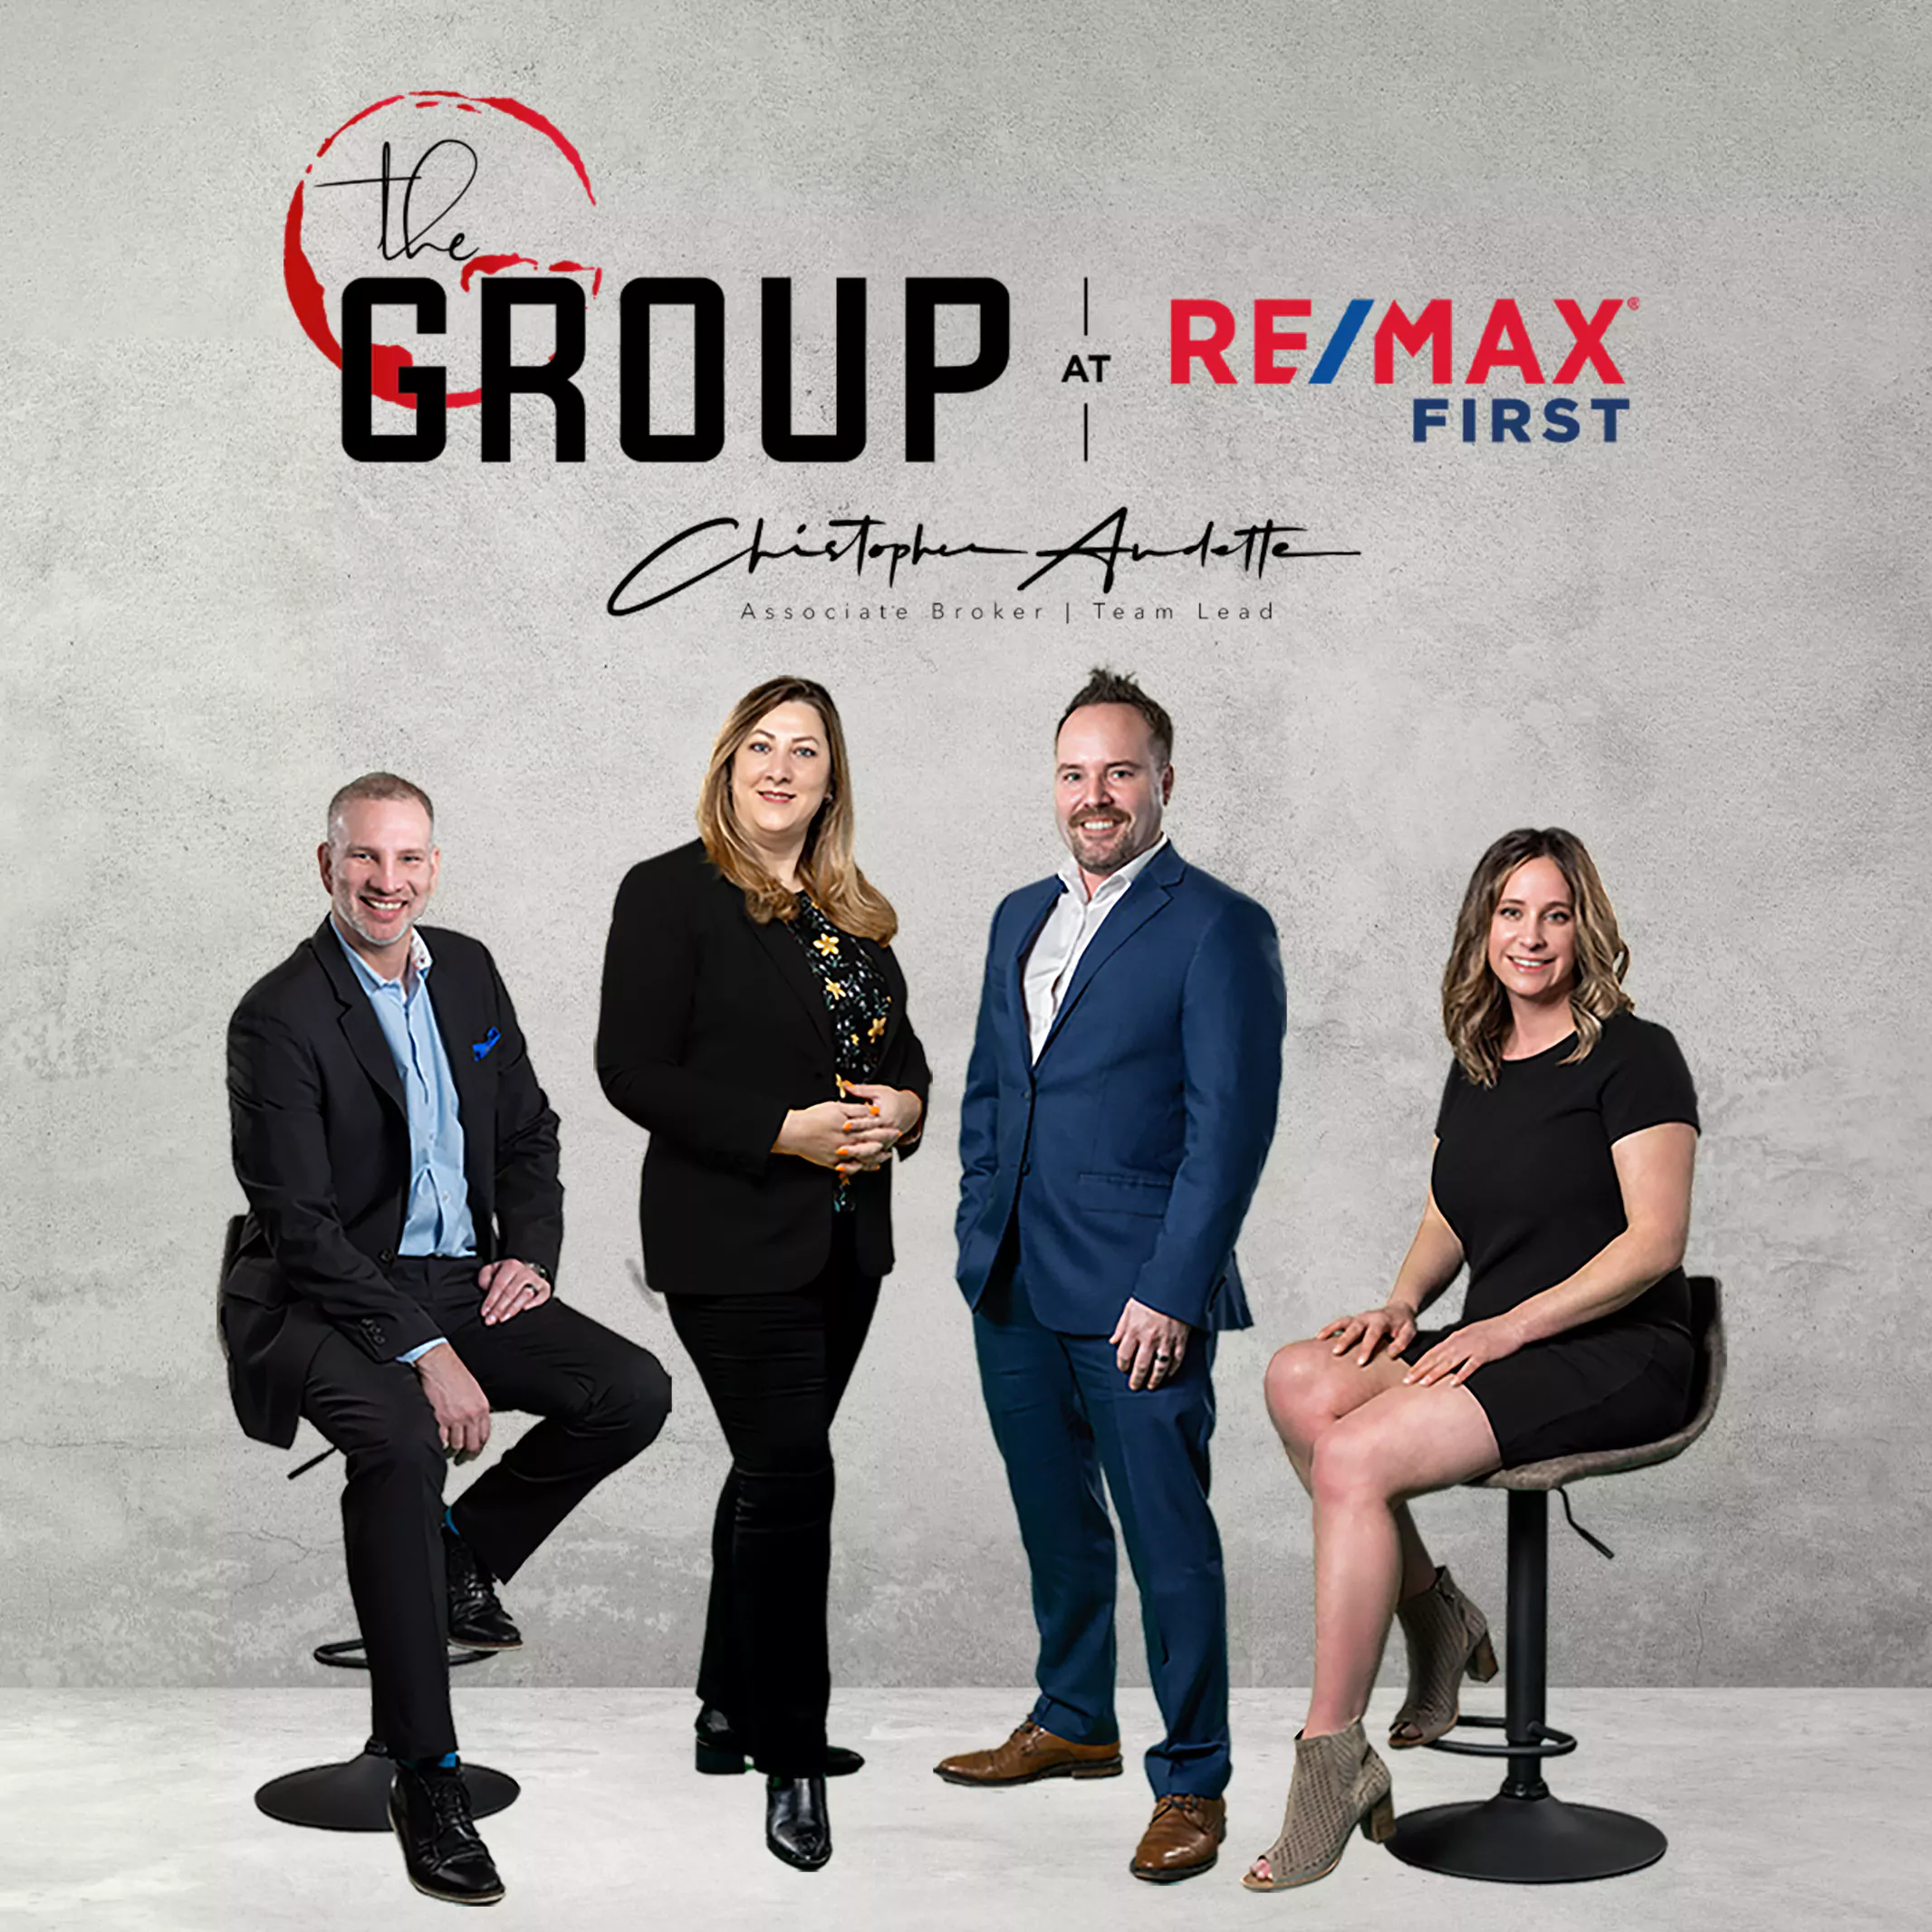 team photo - the group at remax first